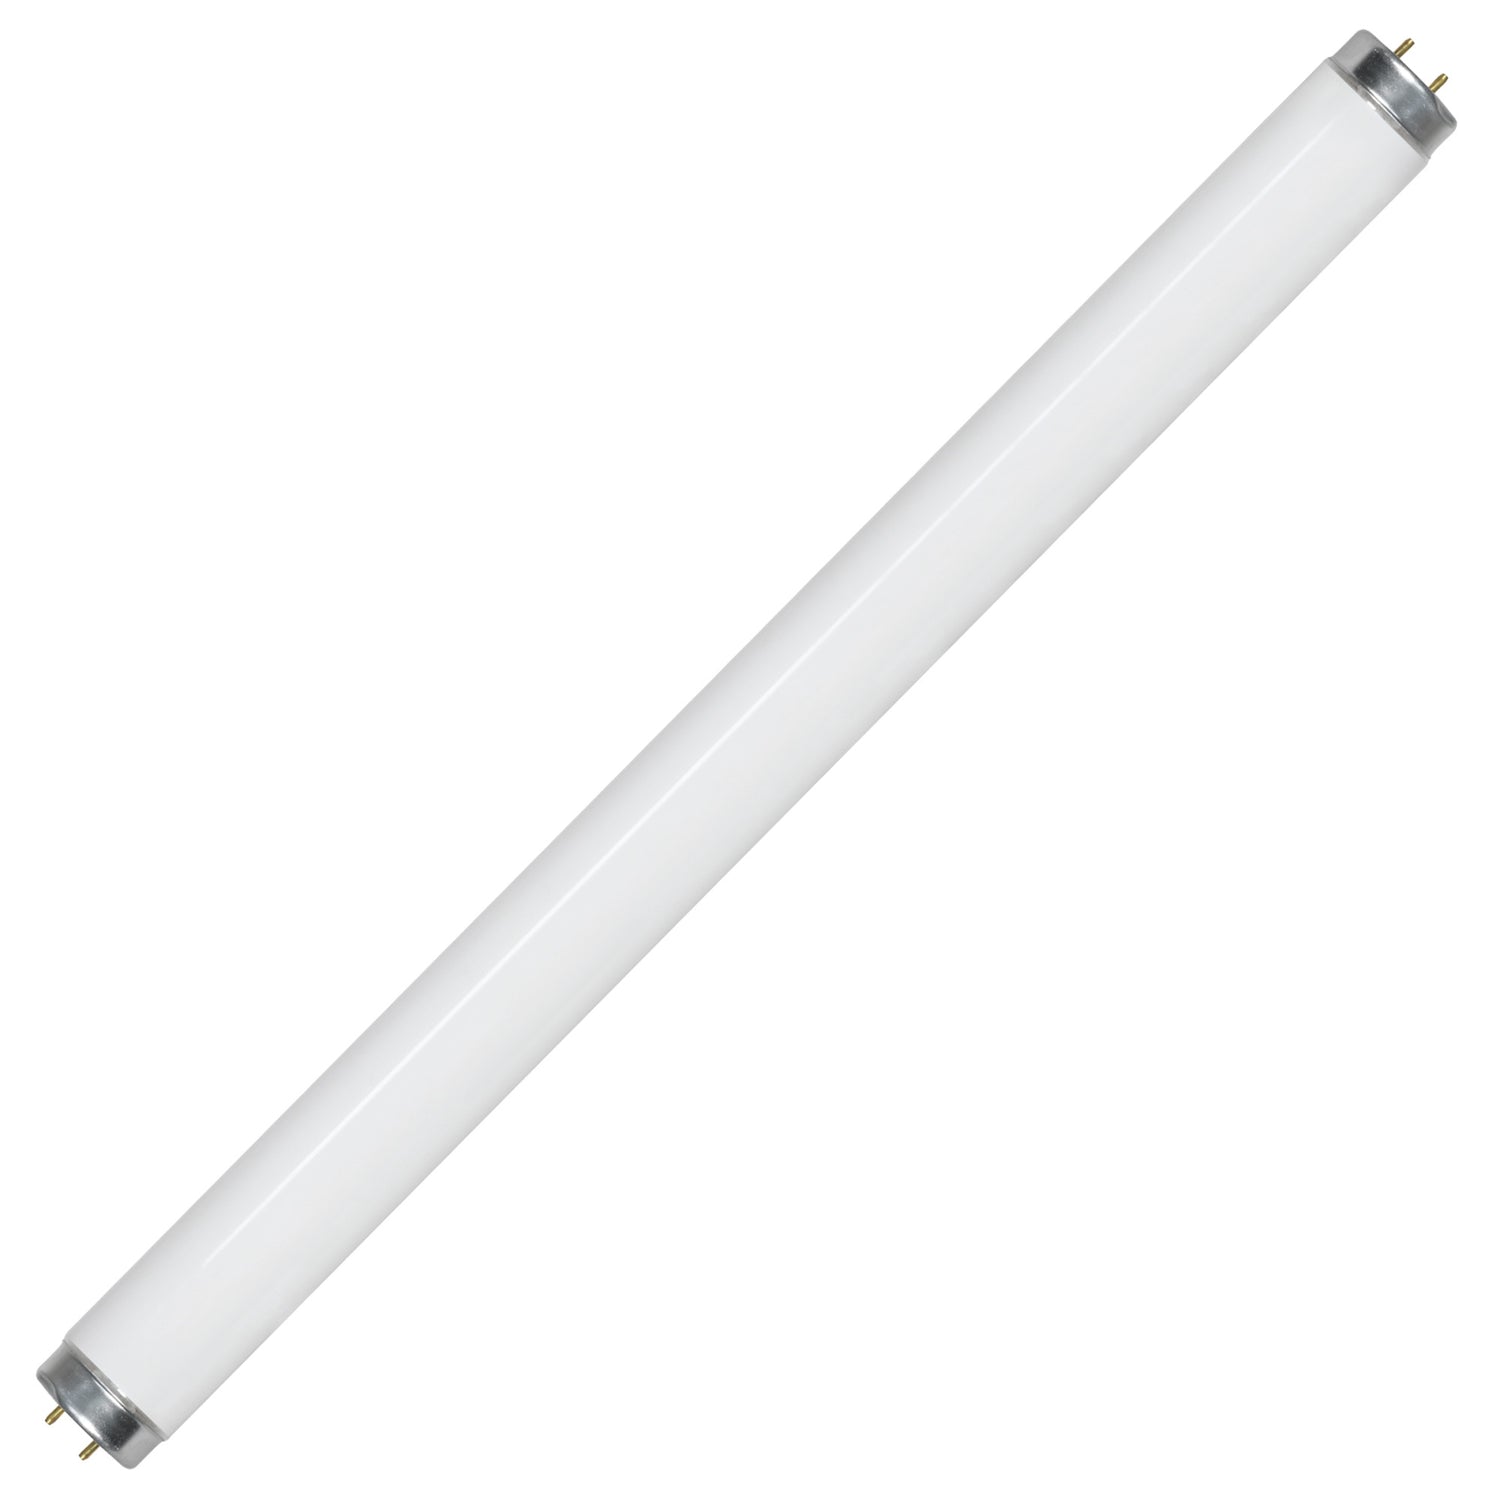 2 ft. 20W Cool White (4100K) G13 Base (T12 Replacement) Fluorescent Linear Light Tube (2-Pack)